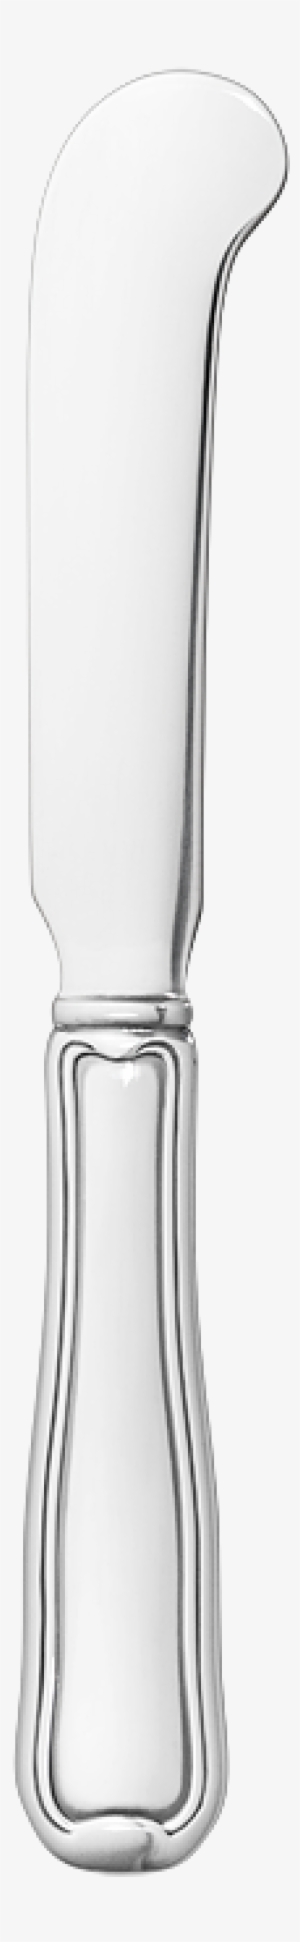 Butter Knife Png Download - Mobile Phone